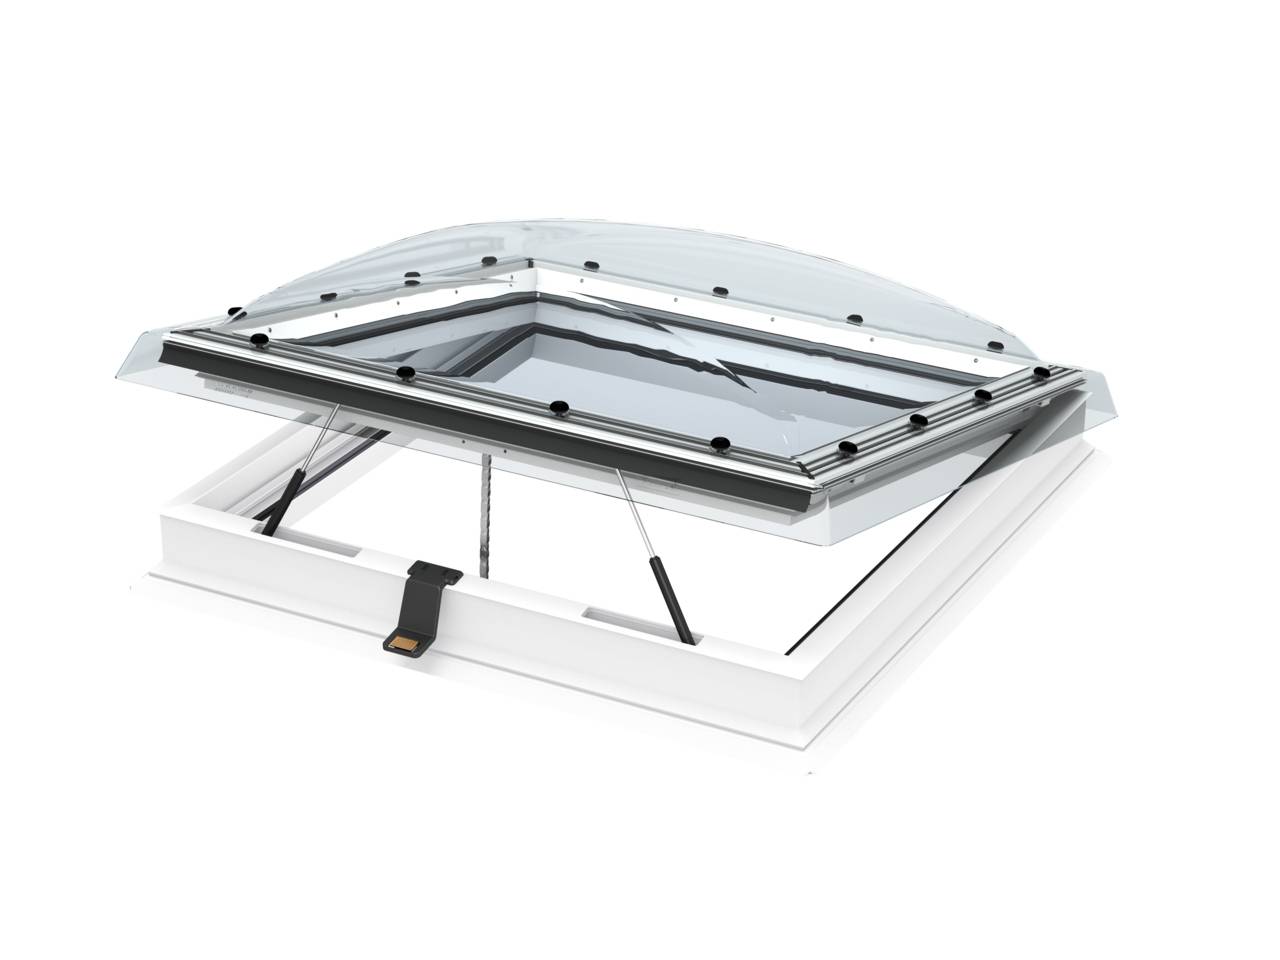 CVP Electrically Operated Flat Roof Window